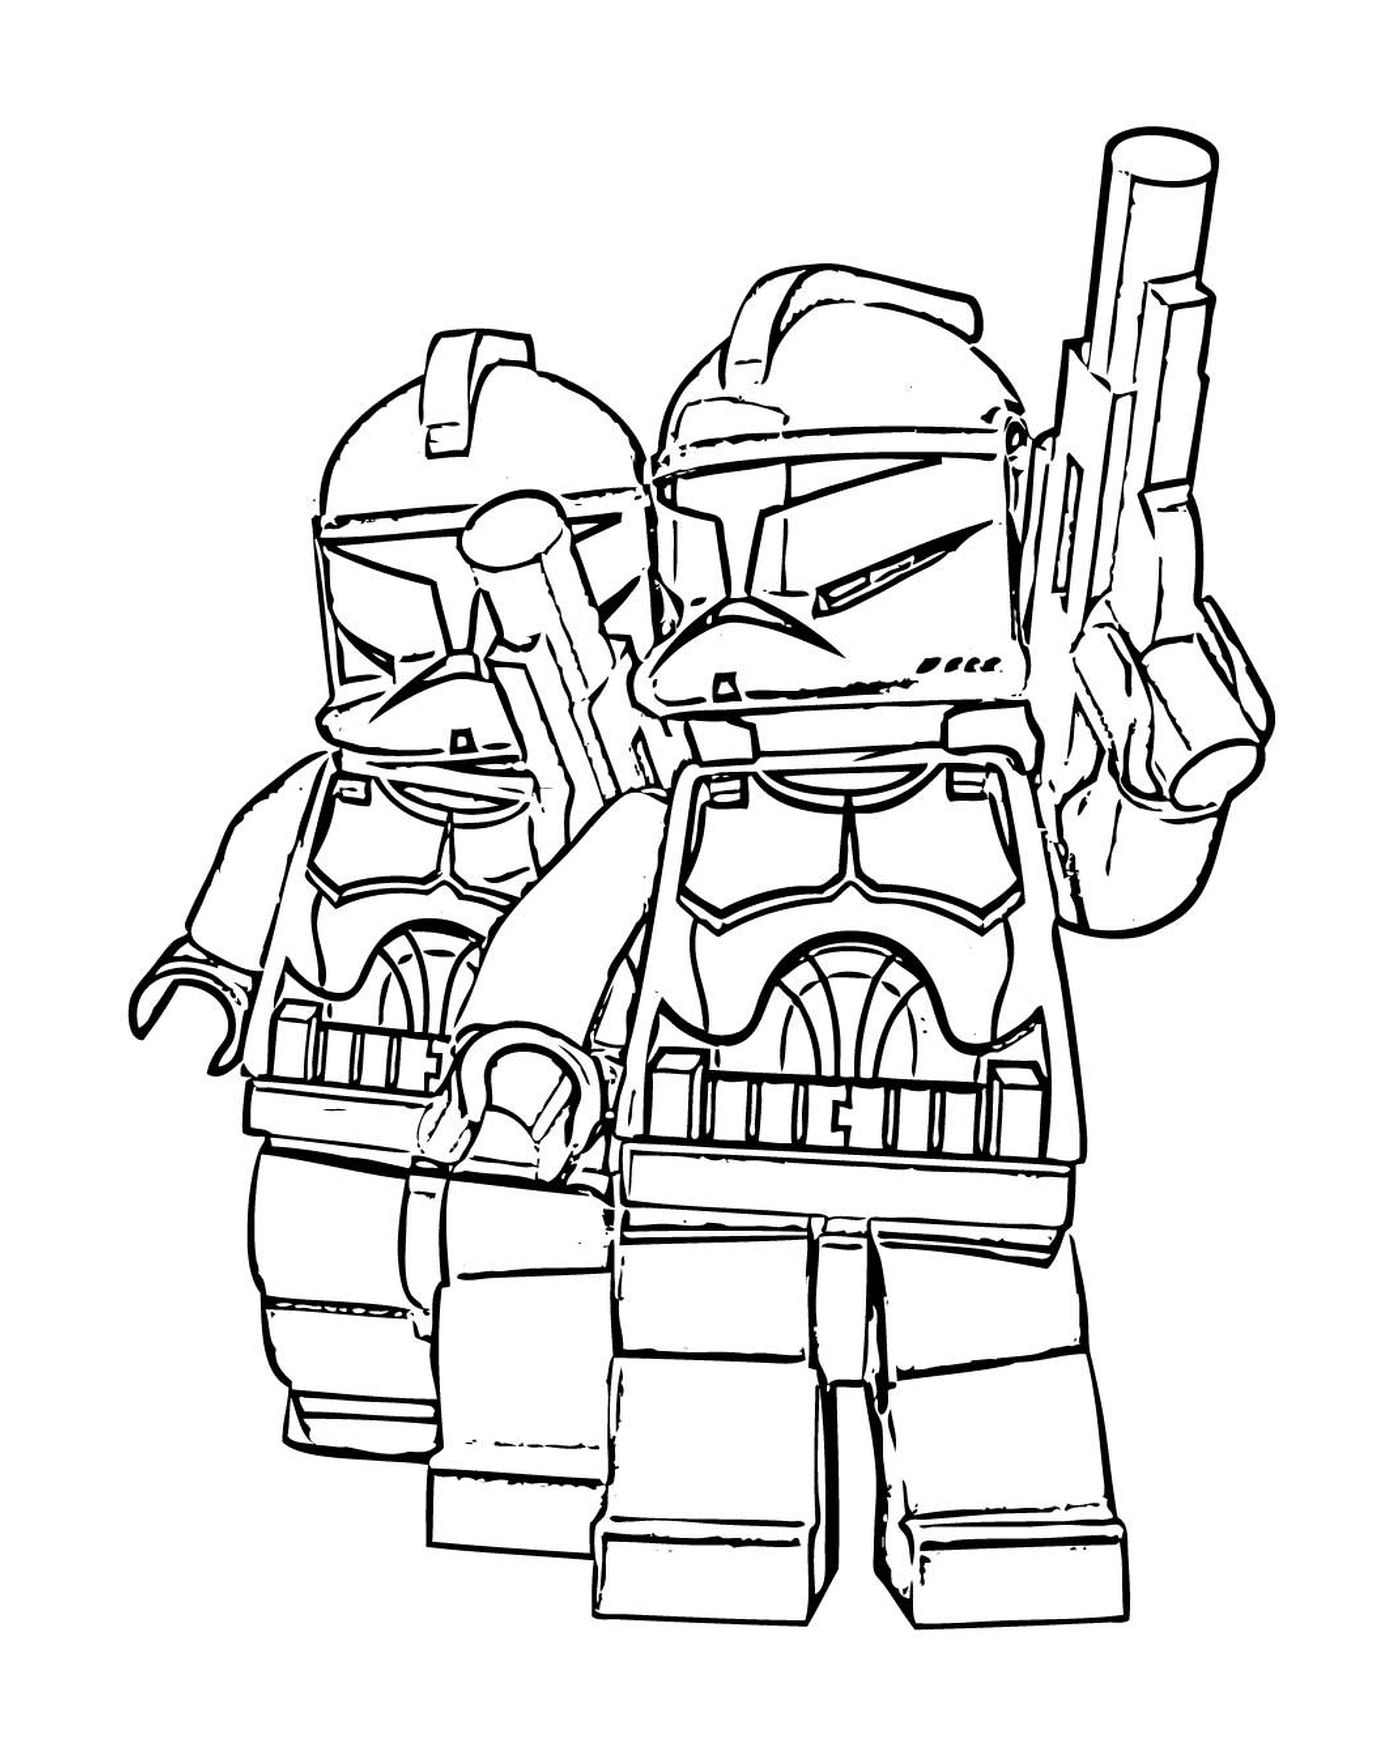  Two Lego Star Wars characters 